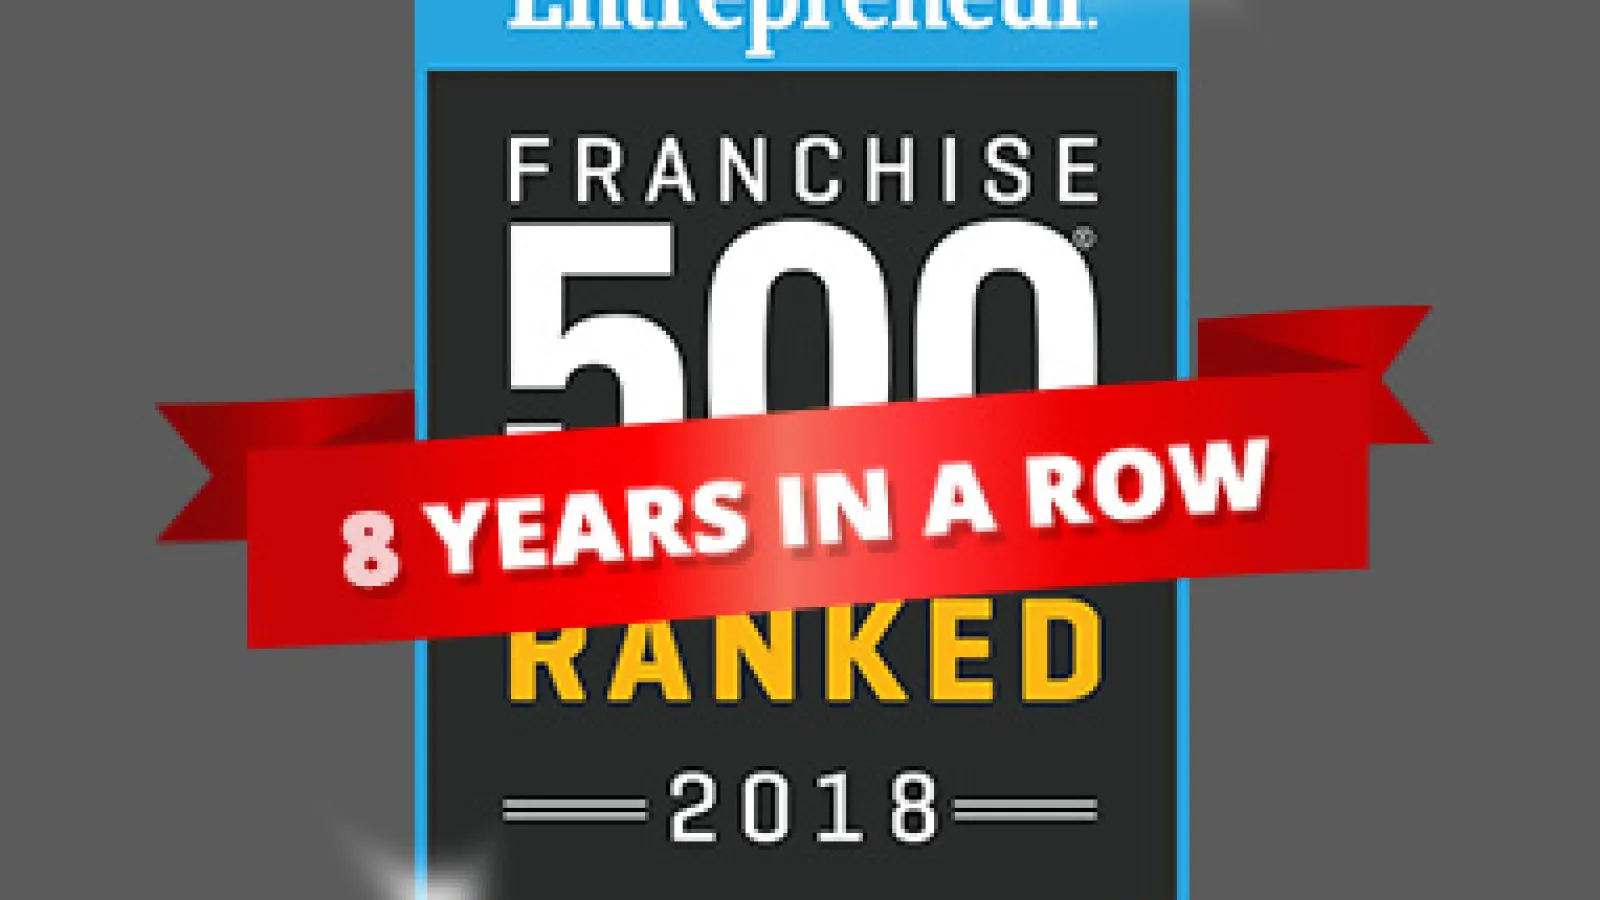 Sir Grout Among the 500 Top Franchises on Entrepreneur Magazine's 2018 List